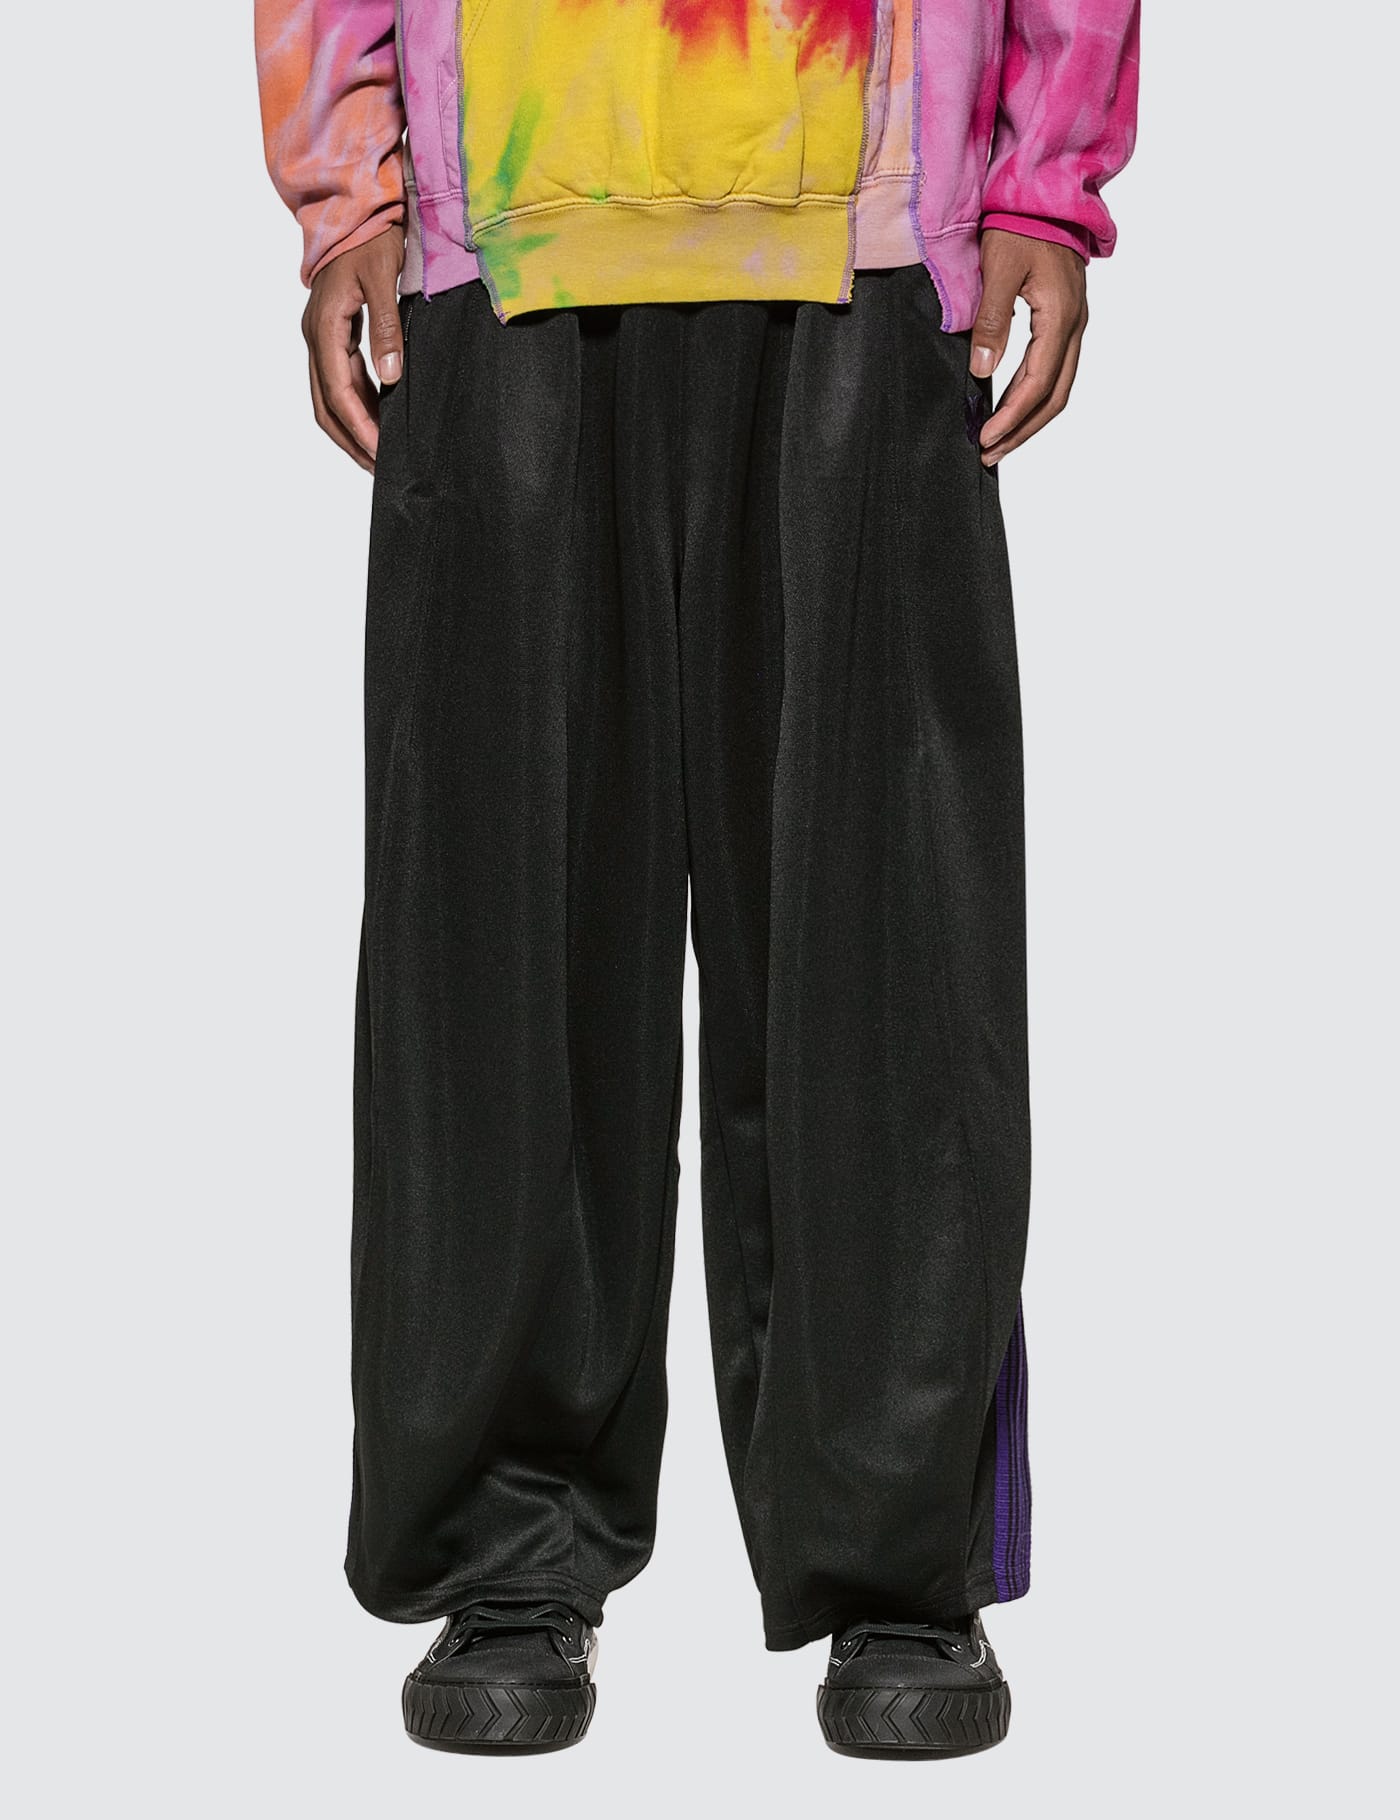 Needles - H.D. Track Pants | HBX - Globally Curated Fashion and